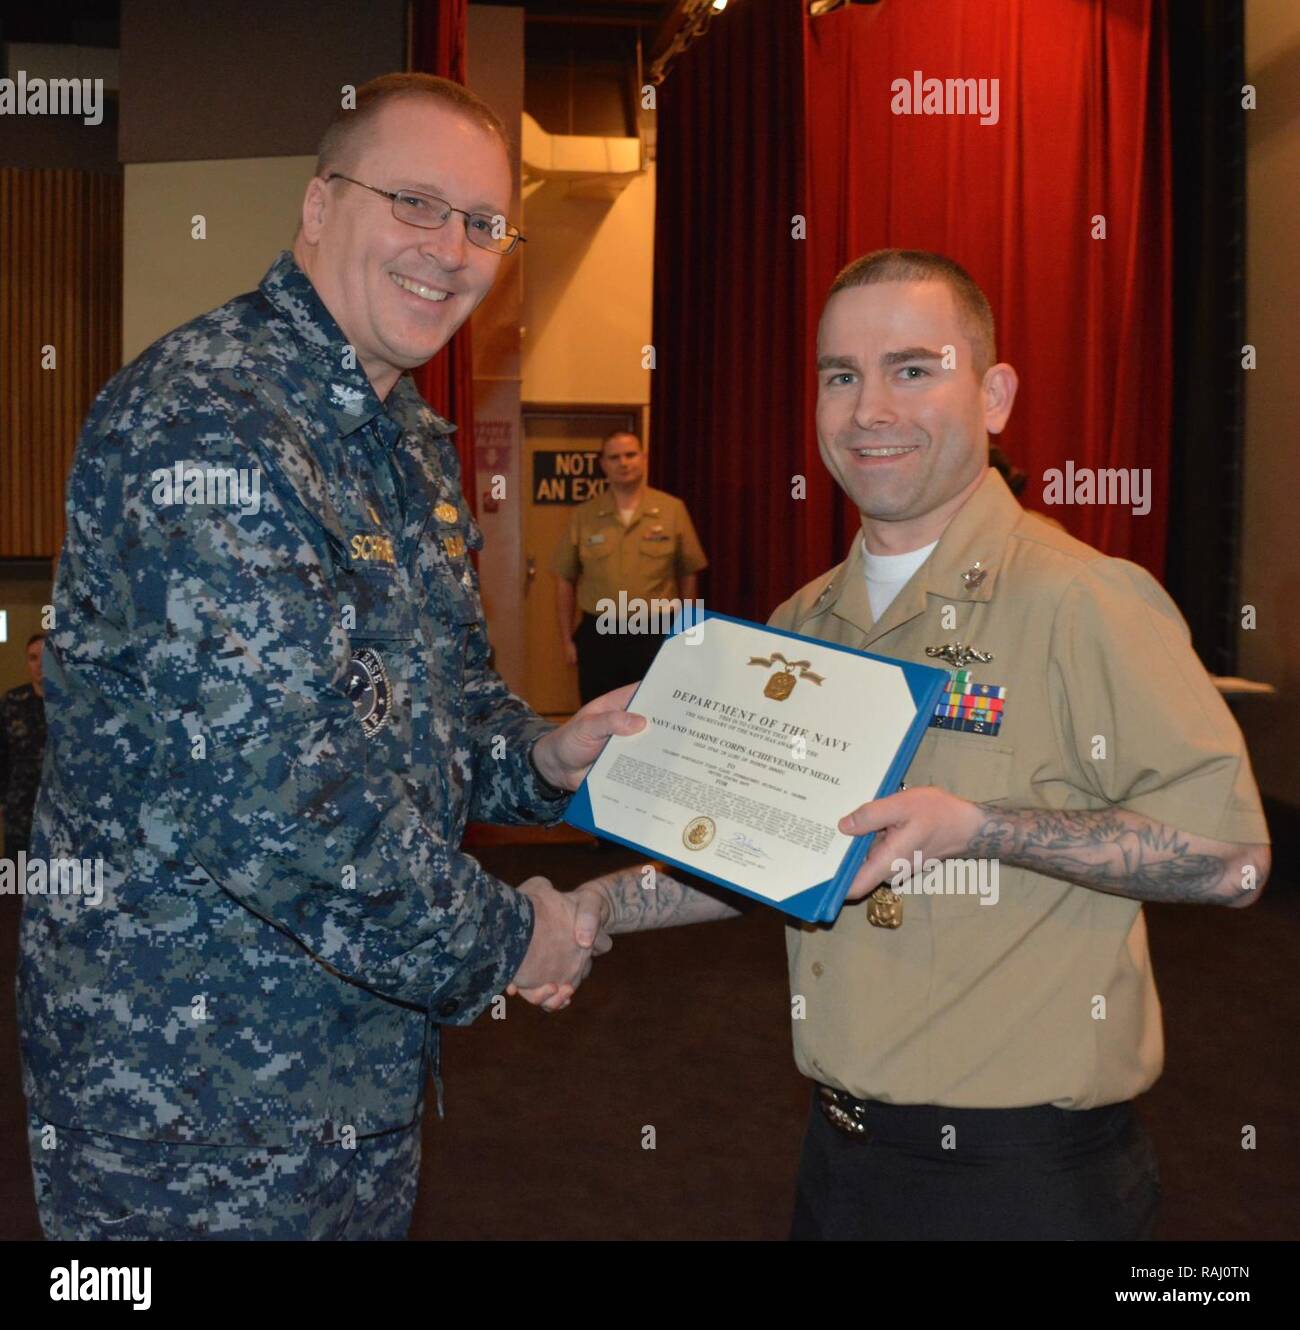 SILVERDALE, Wash. (Feb. 8, 2017) – Capt. Alan Schrader (left), Naval Base Kitsap (NBK) commanding officer, presents Culinary Specialist 1st Class Nicholas Gagner with the Navy and Marine Corps Achievement Medal during an all-hands call held at the NBK-Bangor Theater. More than 30 awards and decorations were bestowed to NBK personnel during the event. Stock Photo